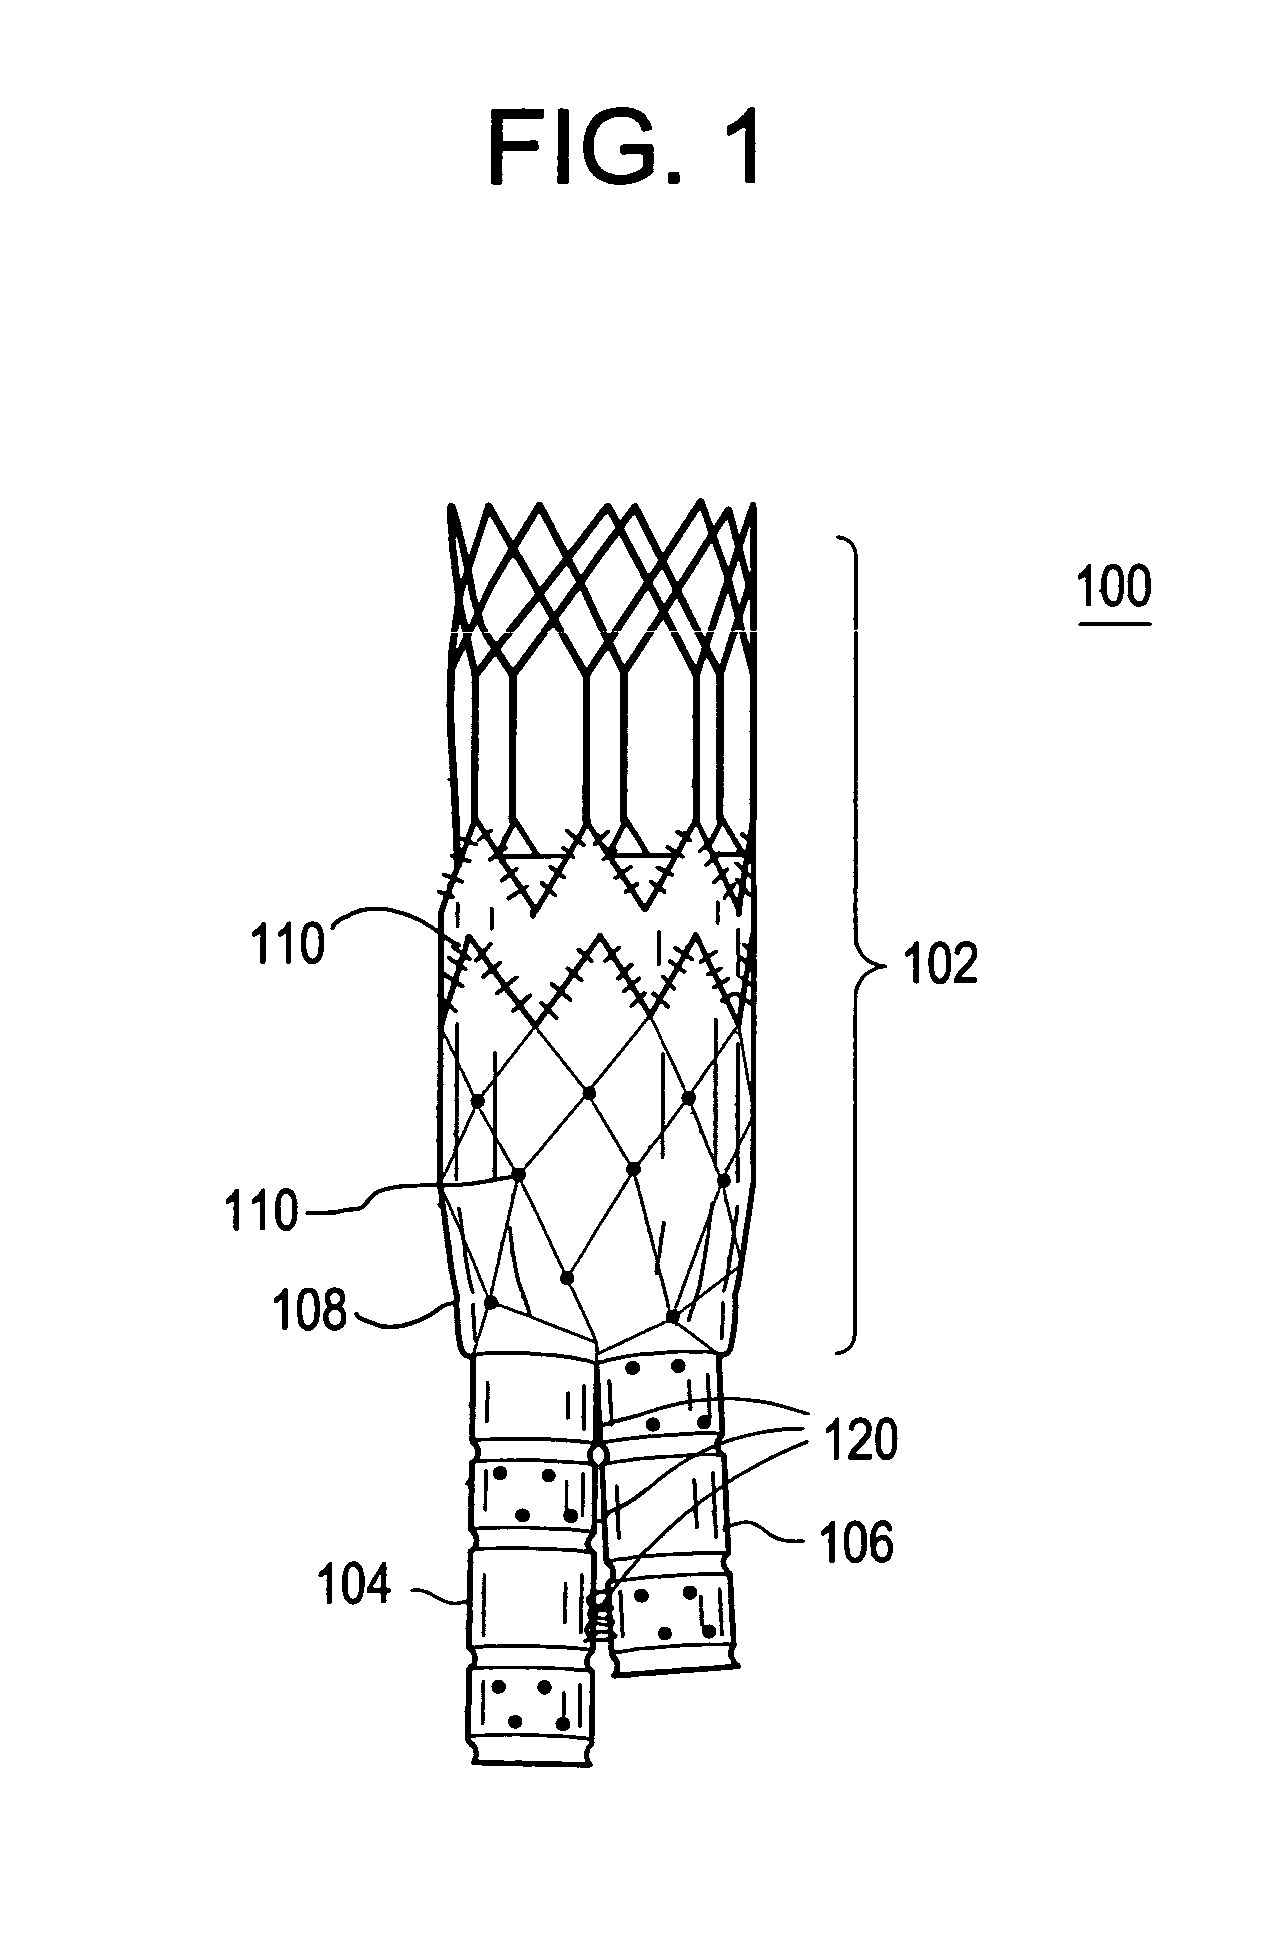 AAA repair device with aneurysm sac access port